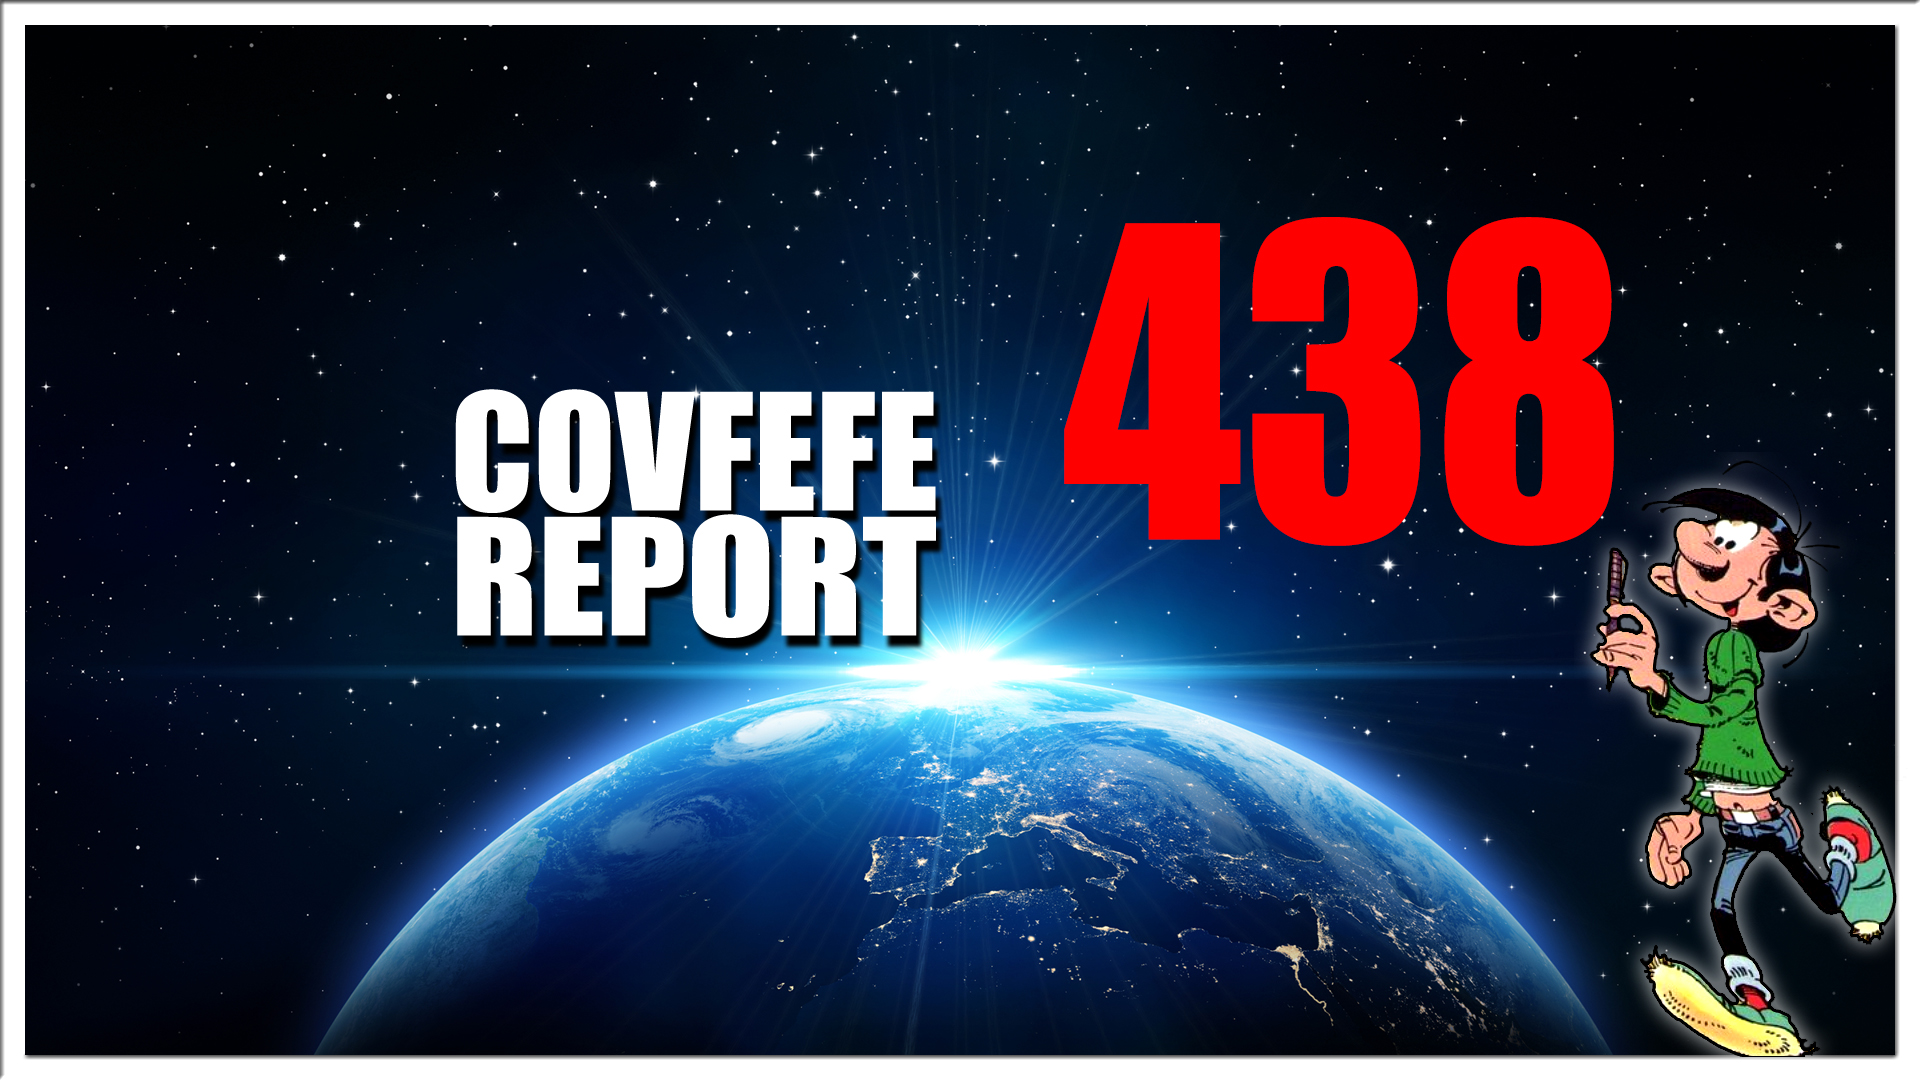 Covfefe Report 438. The Shot Heard Around The World, FRANK The voice of free speech